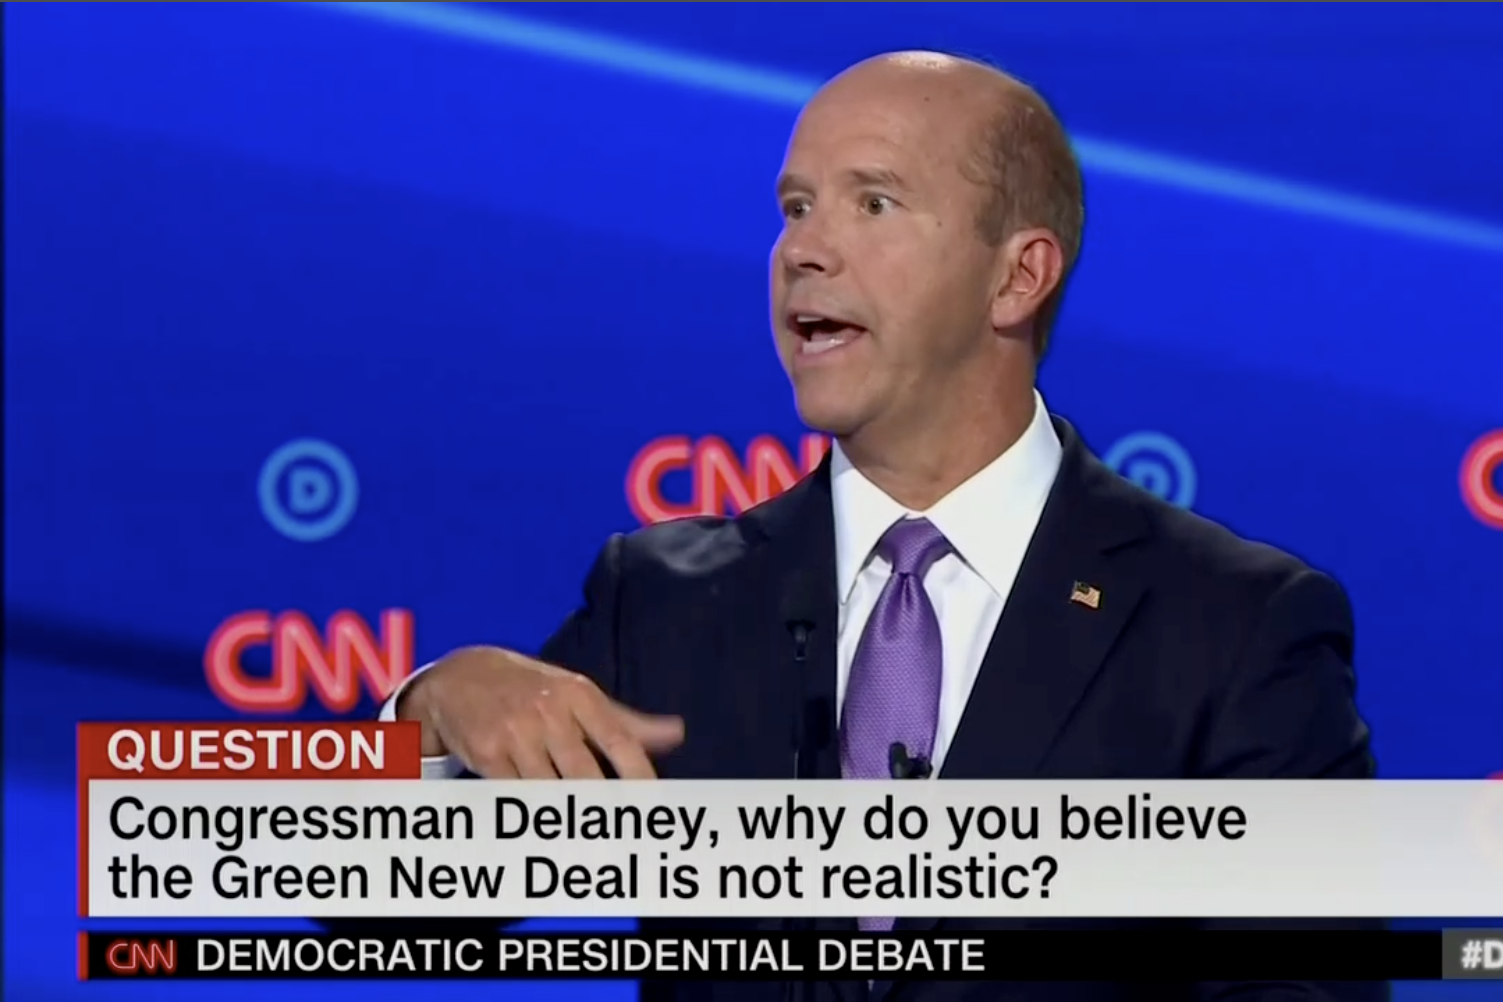 In this screengrab from CNN, Tom Delaney debates. The banner reads: "Congressman Delaney, why do you believe the Green New Deal is not realistic?"